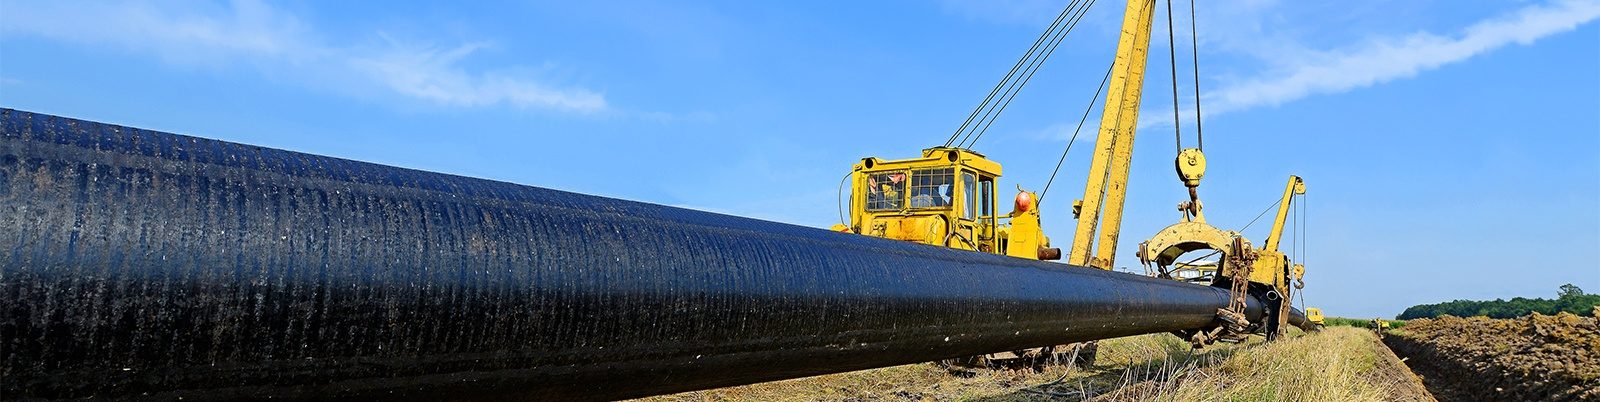 Polyethylene and polypropylene coatings for Oil and Gas Pipelines